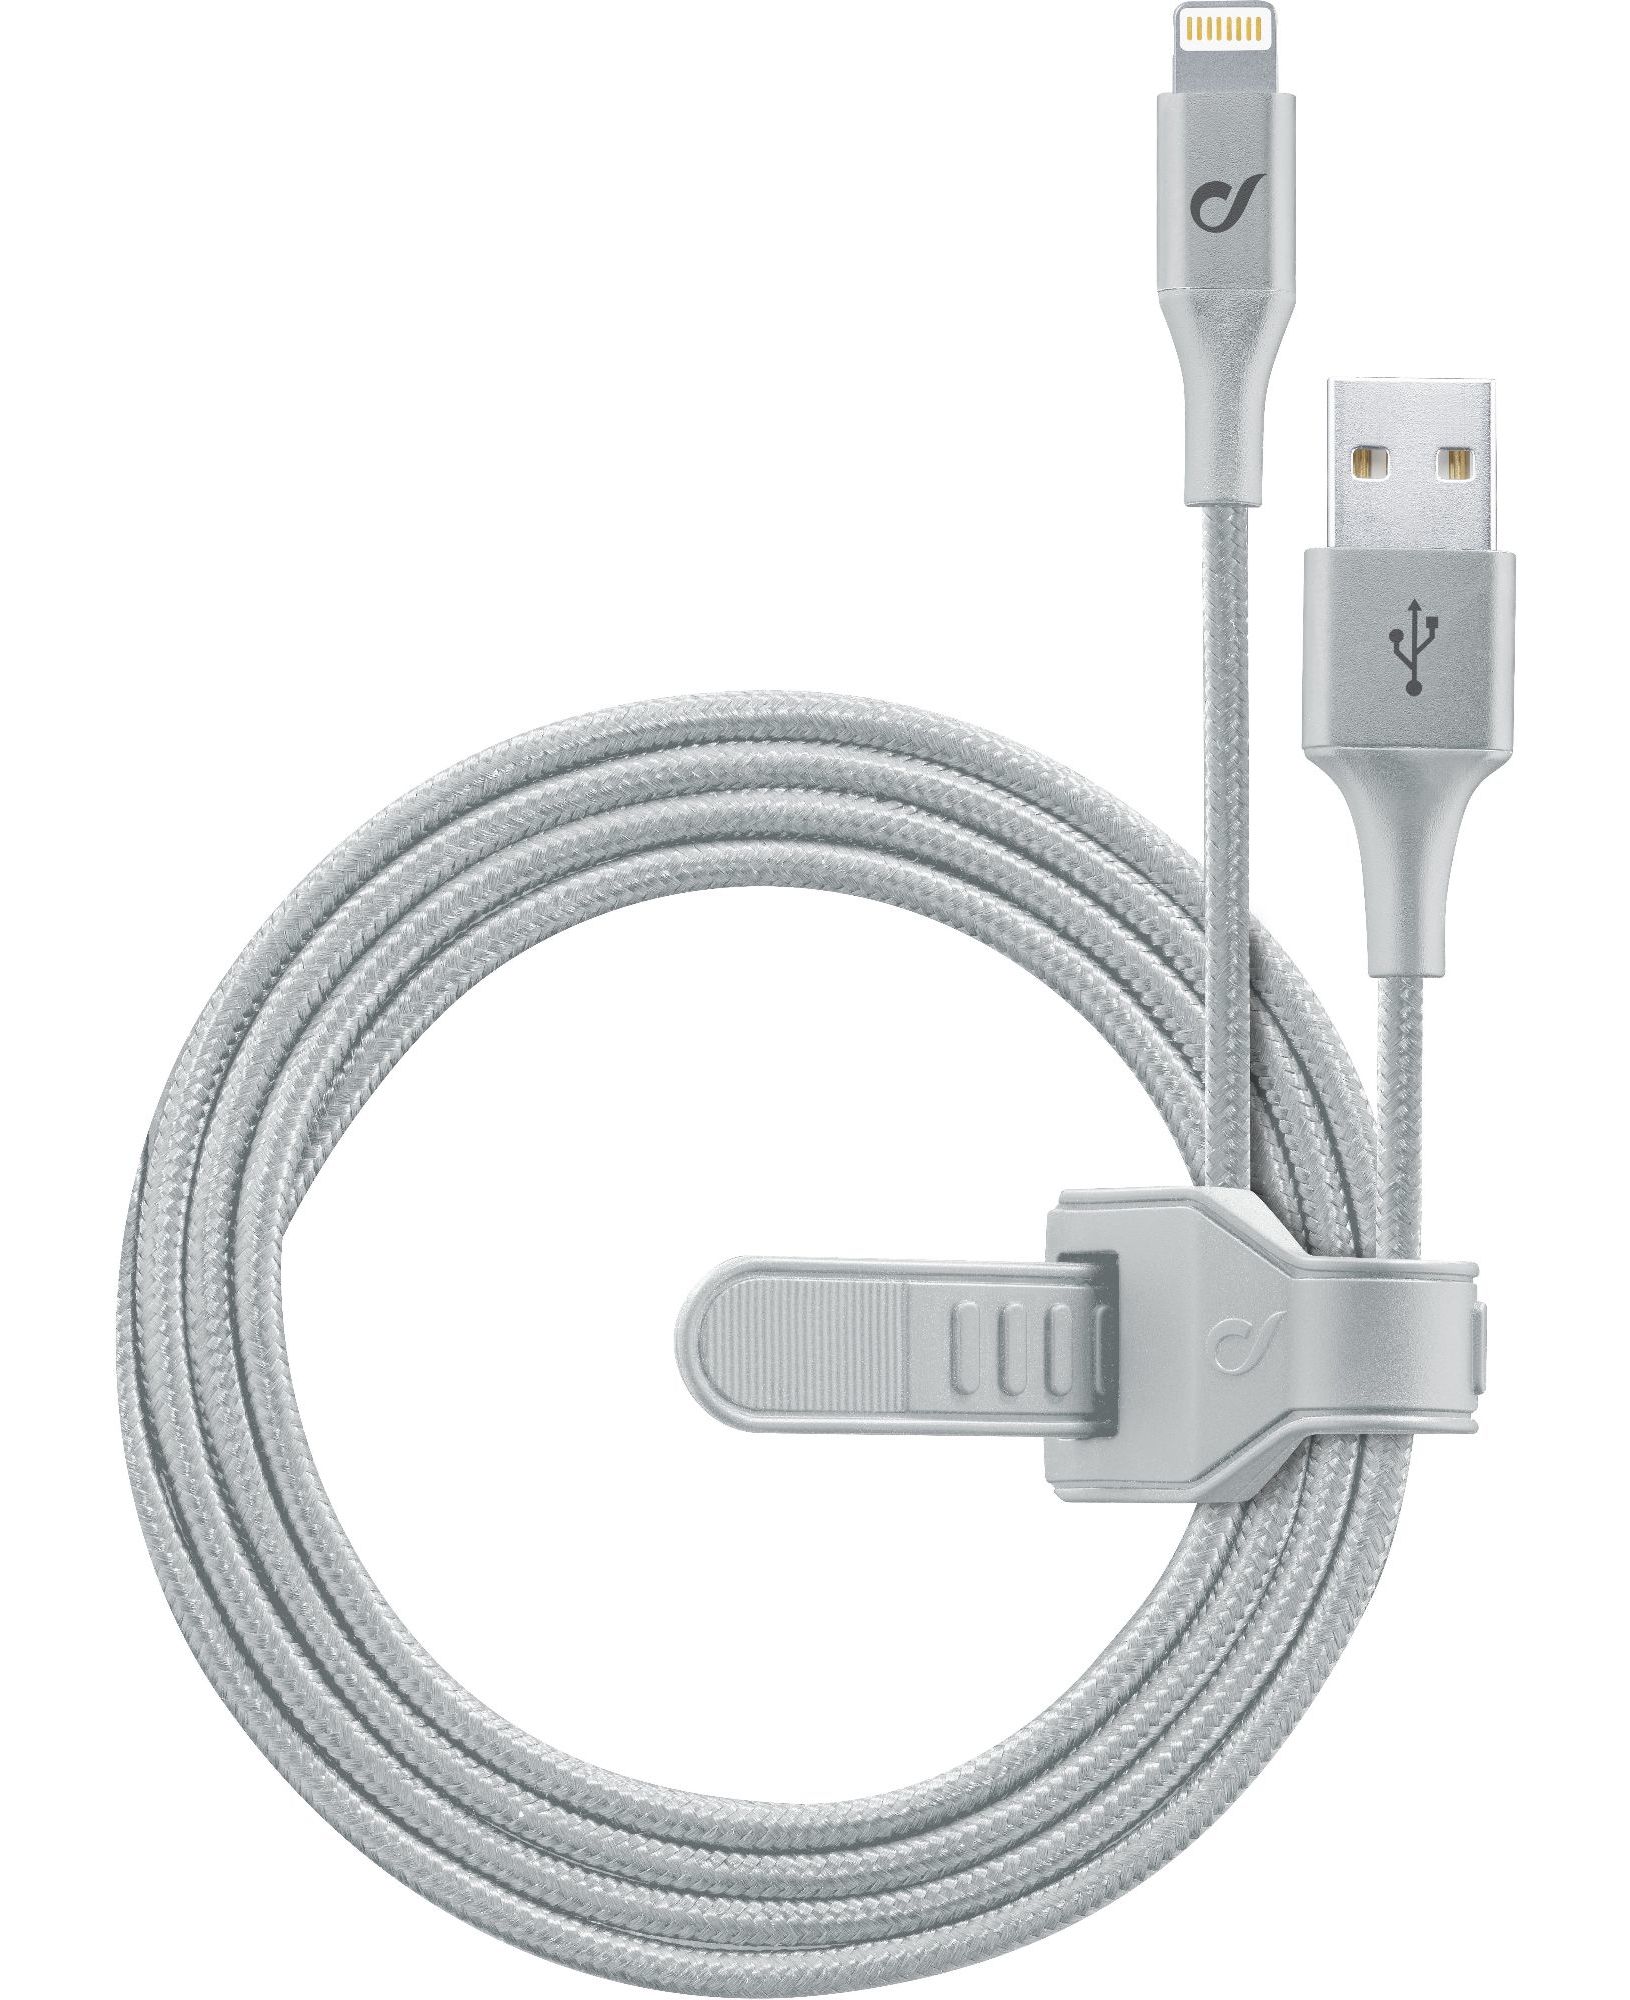 Usb cable, Apple lightning silicone strap, infinity silver